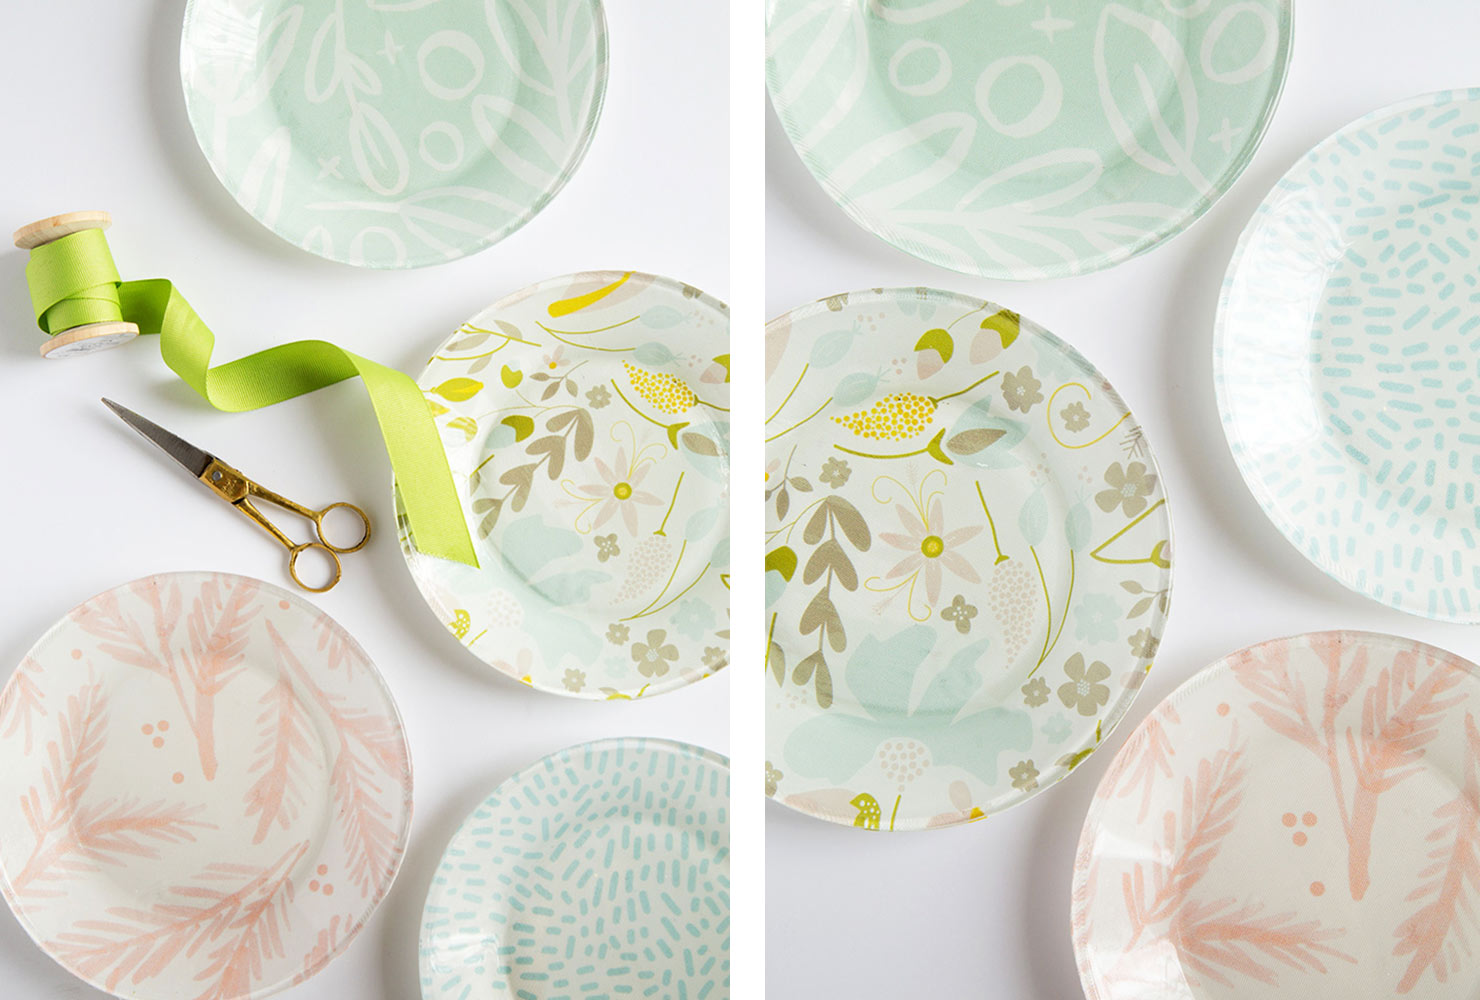 20 gift ideas patterned plates 